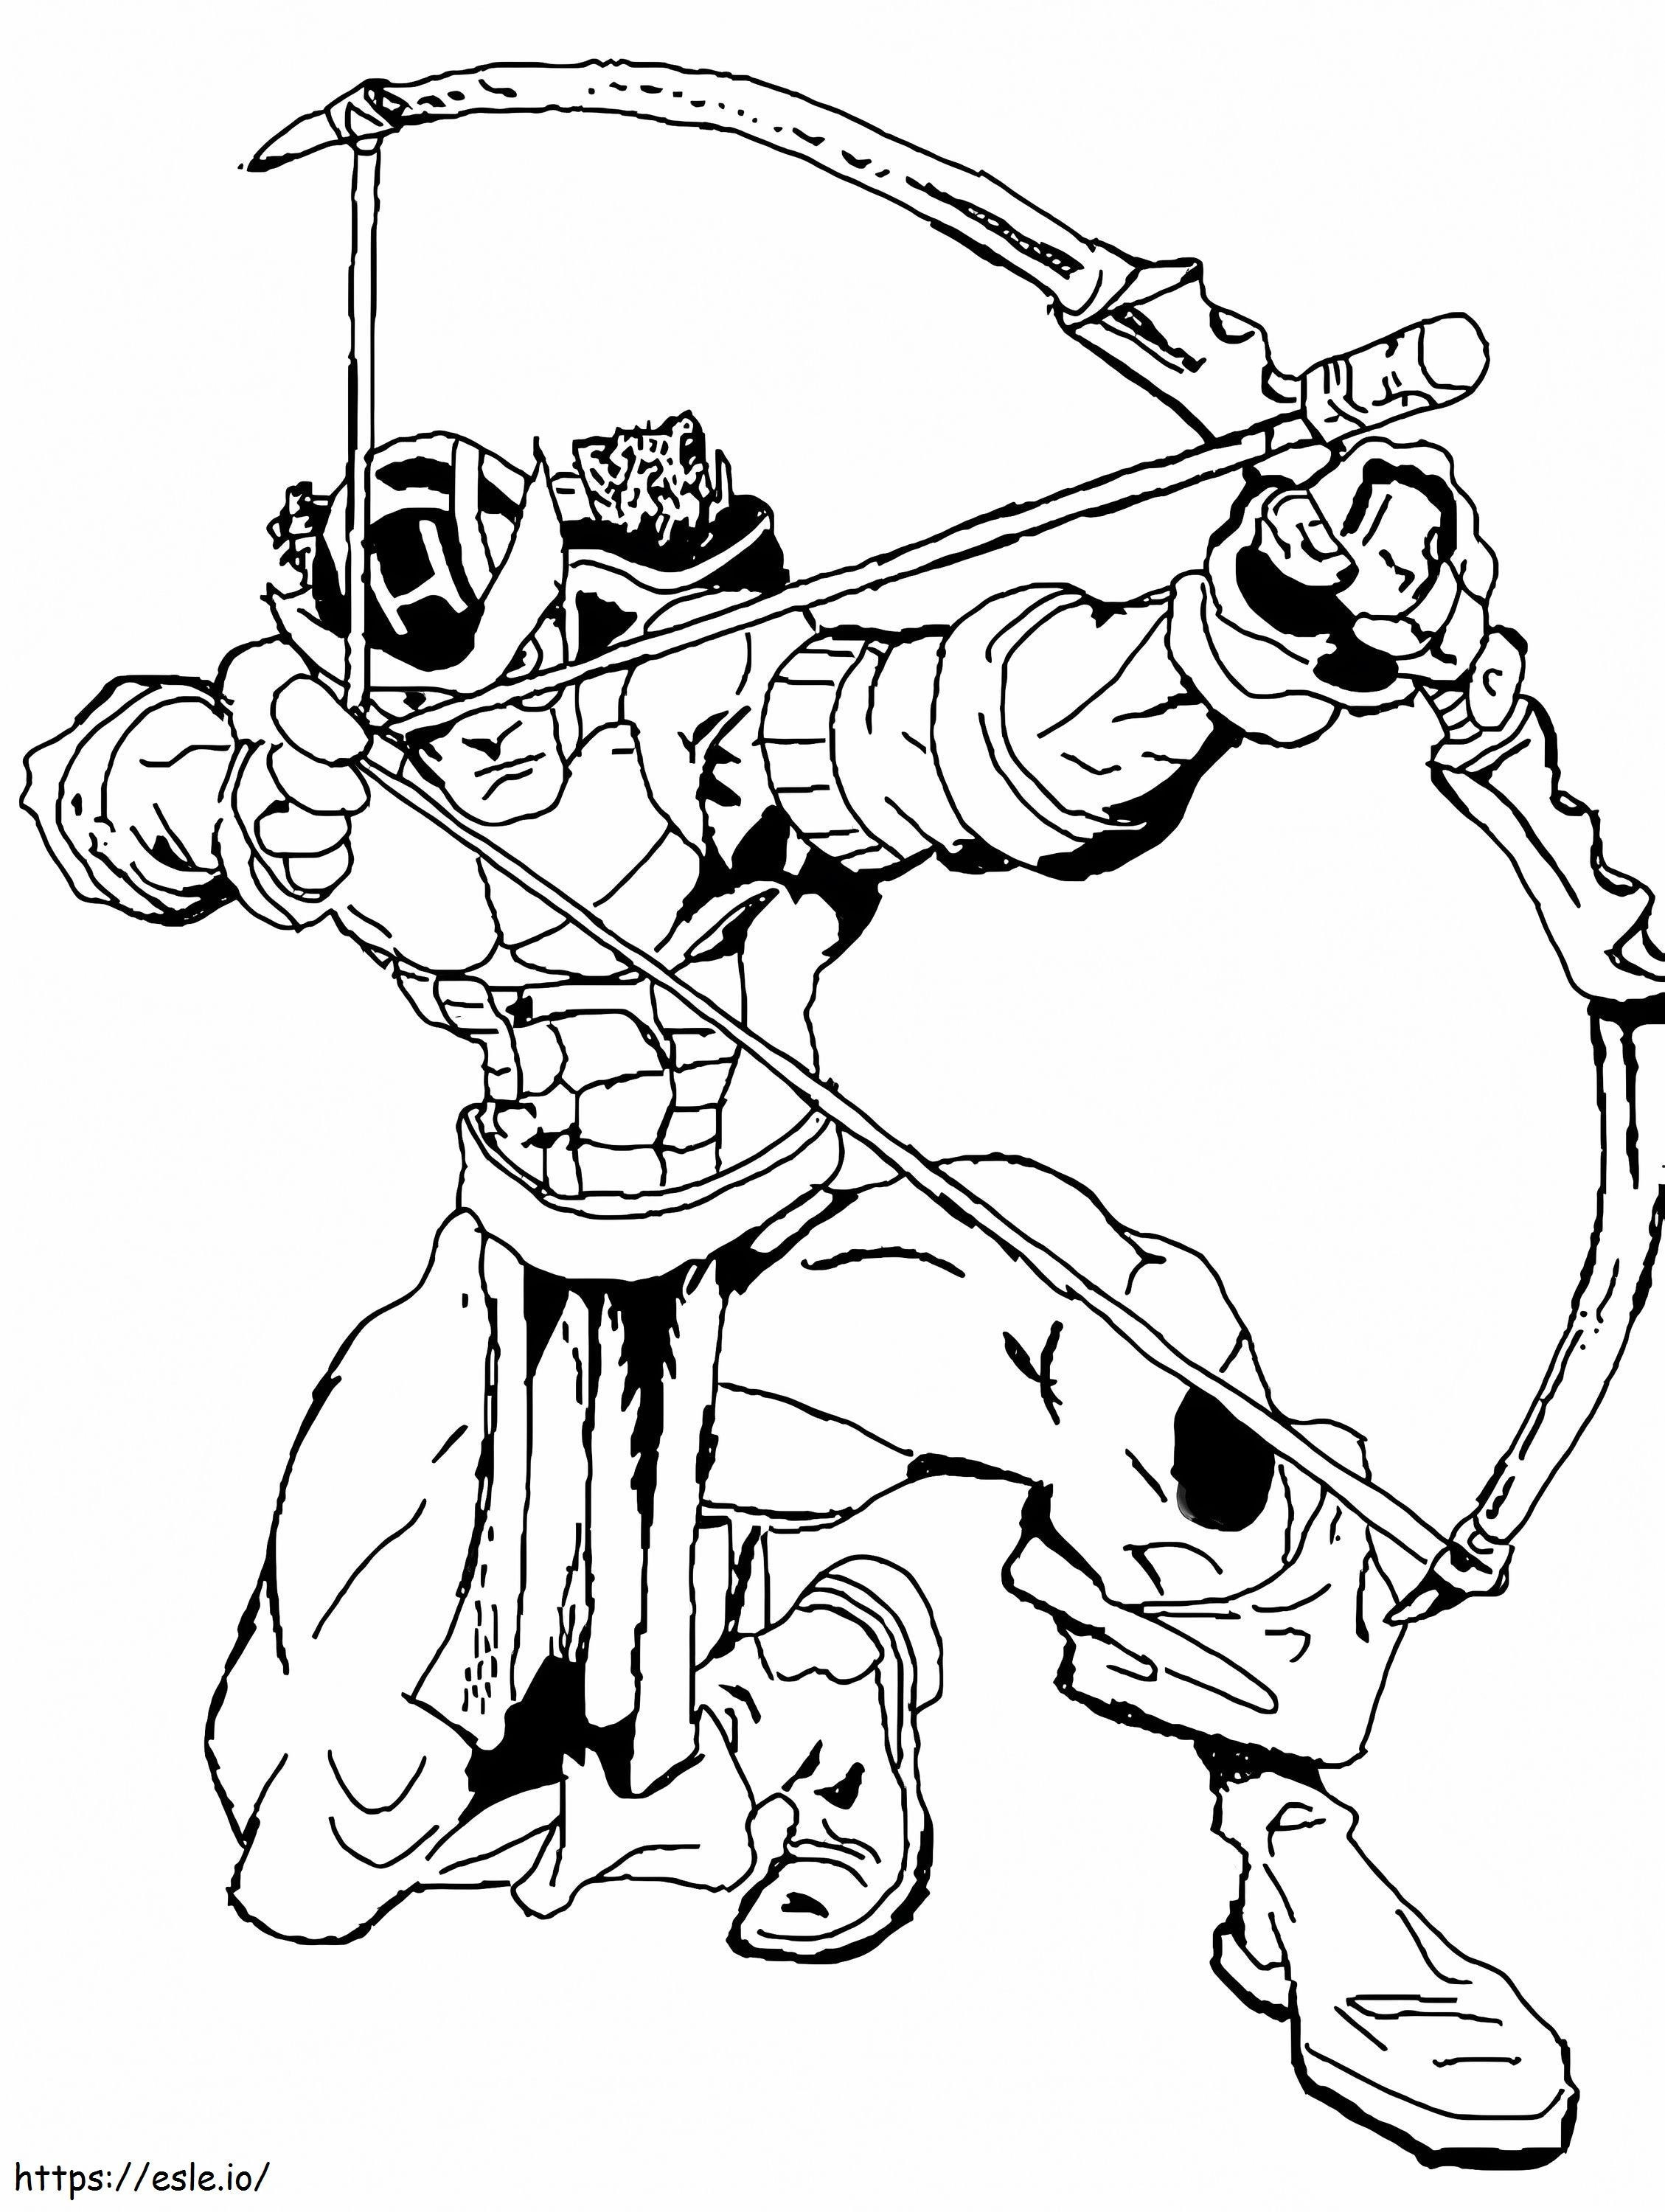 Hawkeye Action coloring page